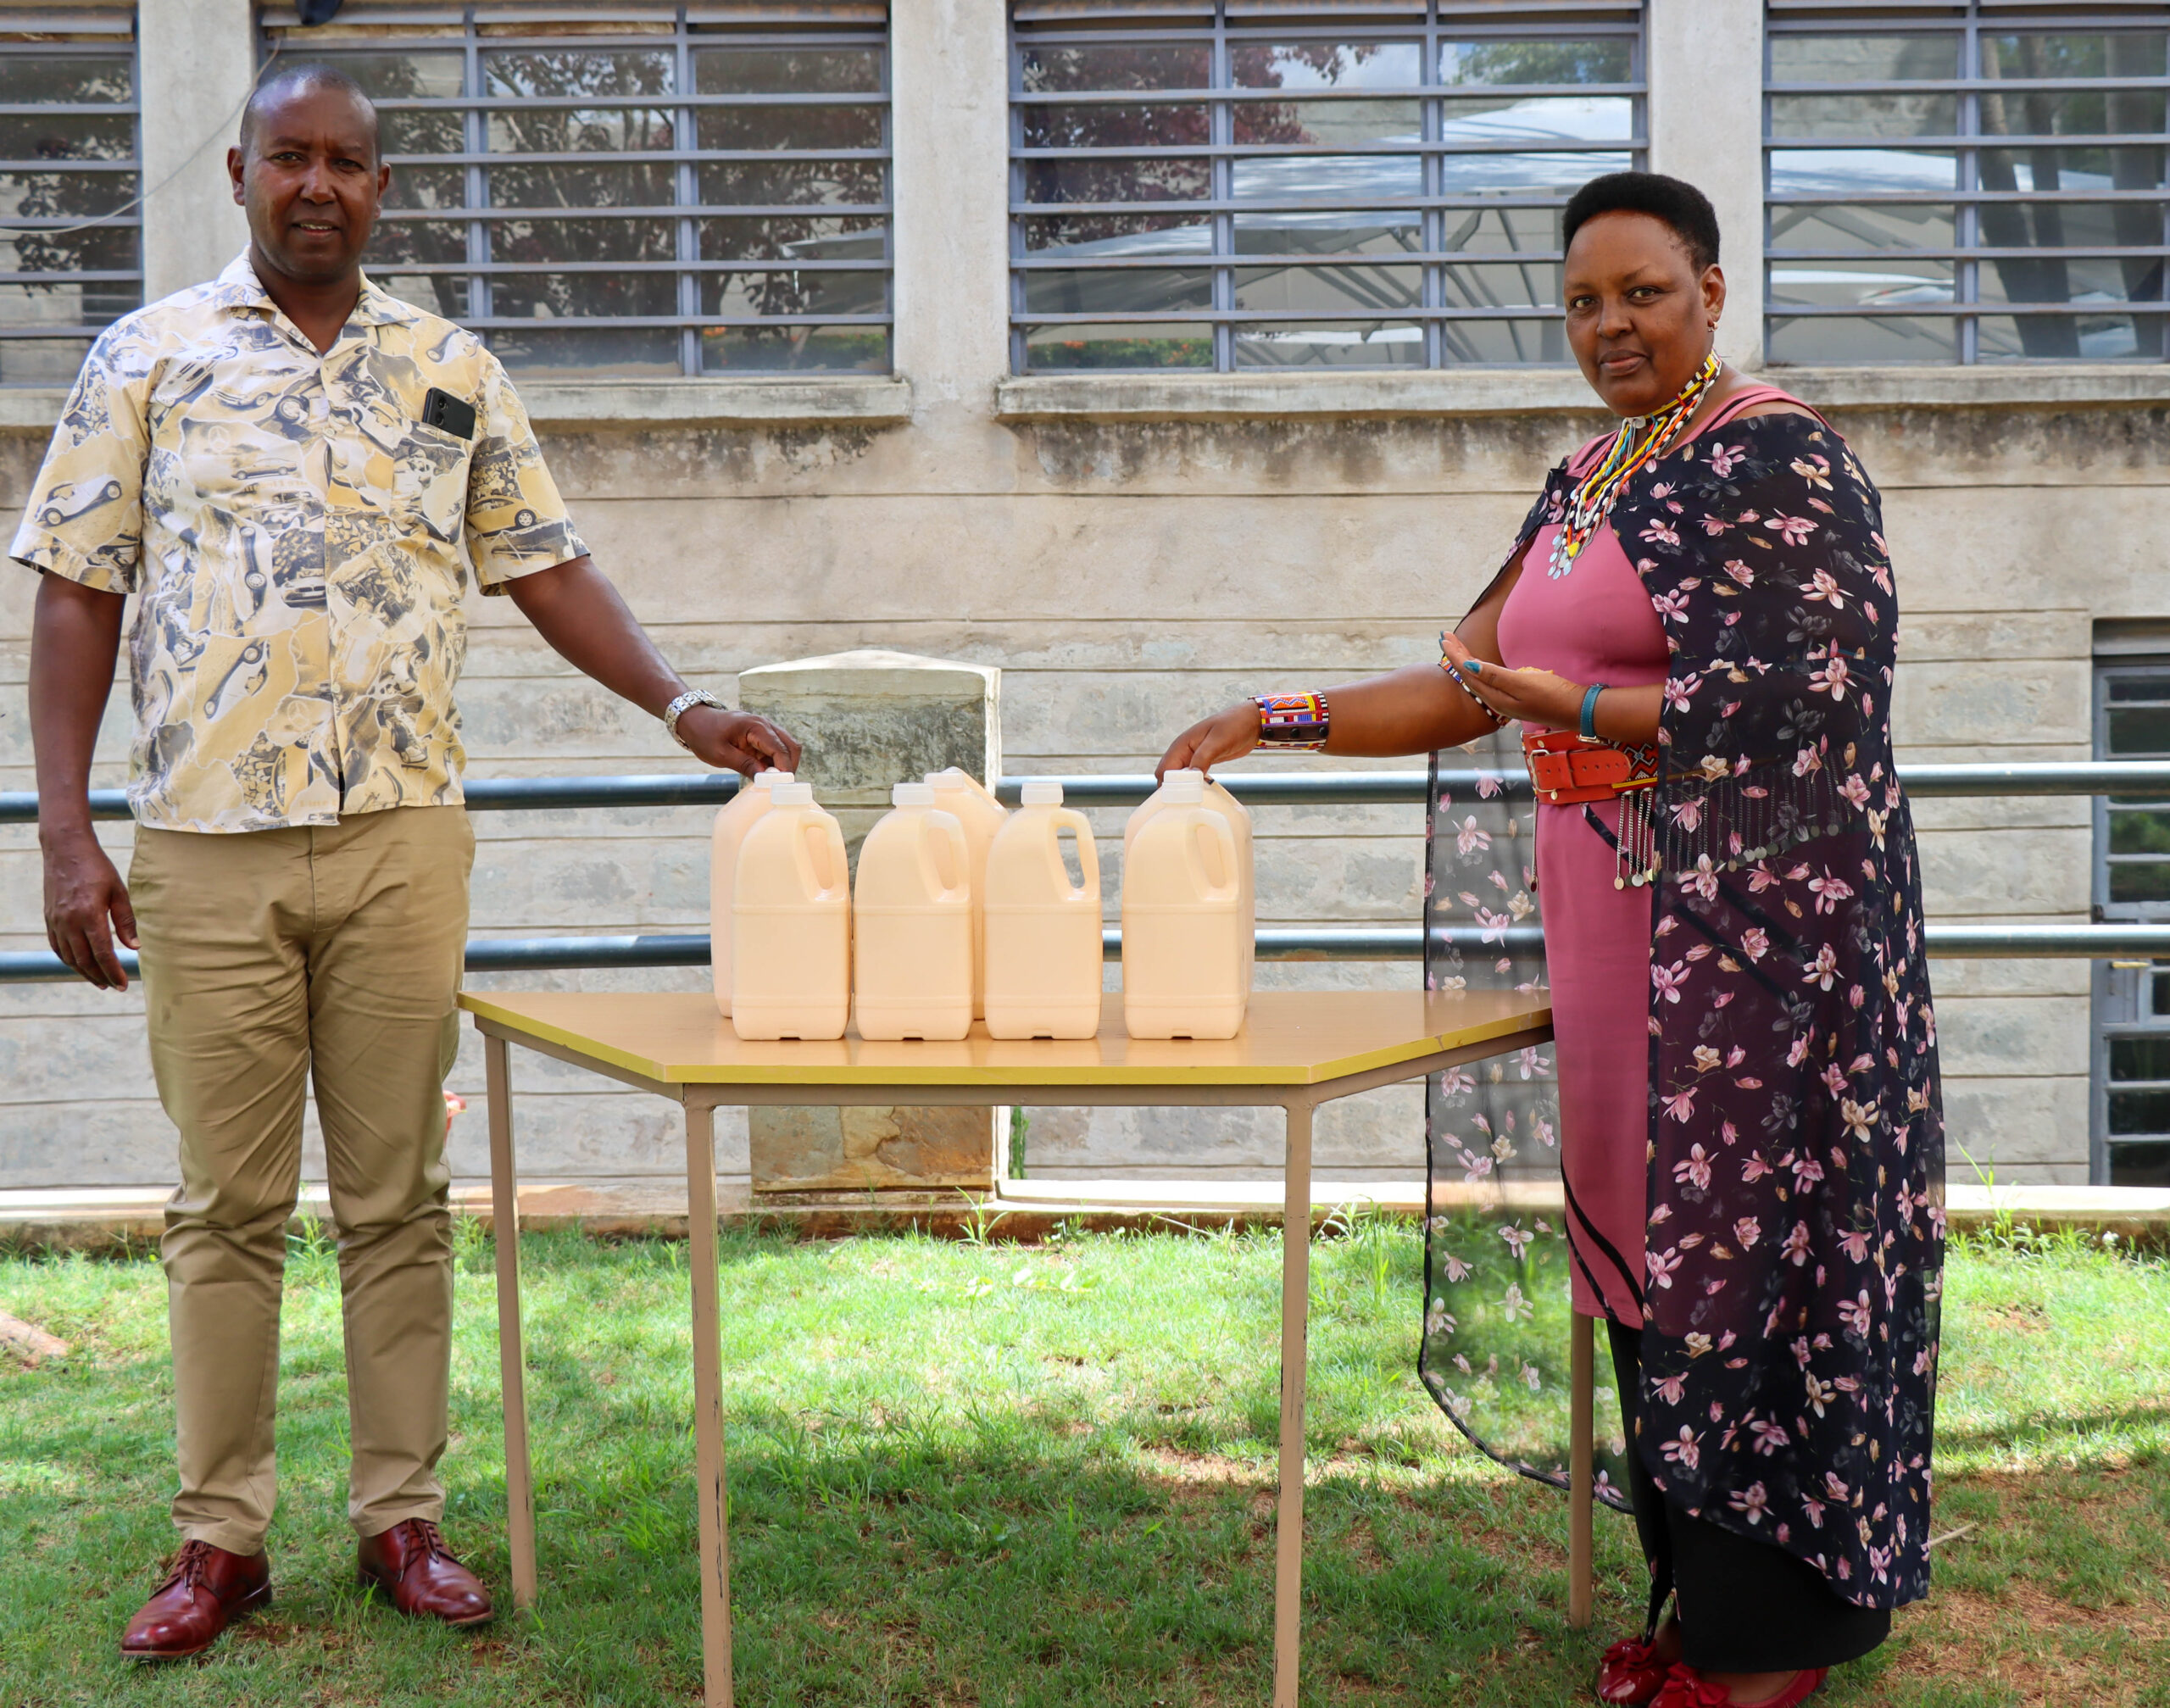 FROM NOMADIC PASTORALISTS TO THRIVING PRODUCERS OF MILK AND MILK PRODUCTS